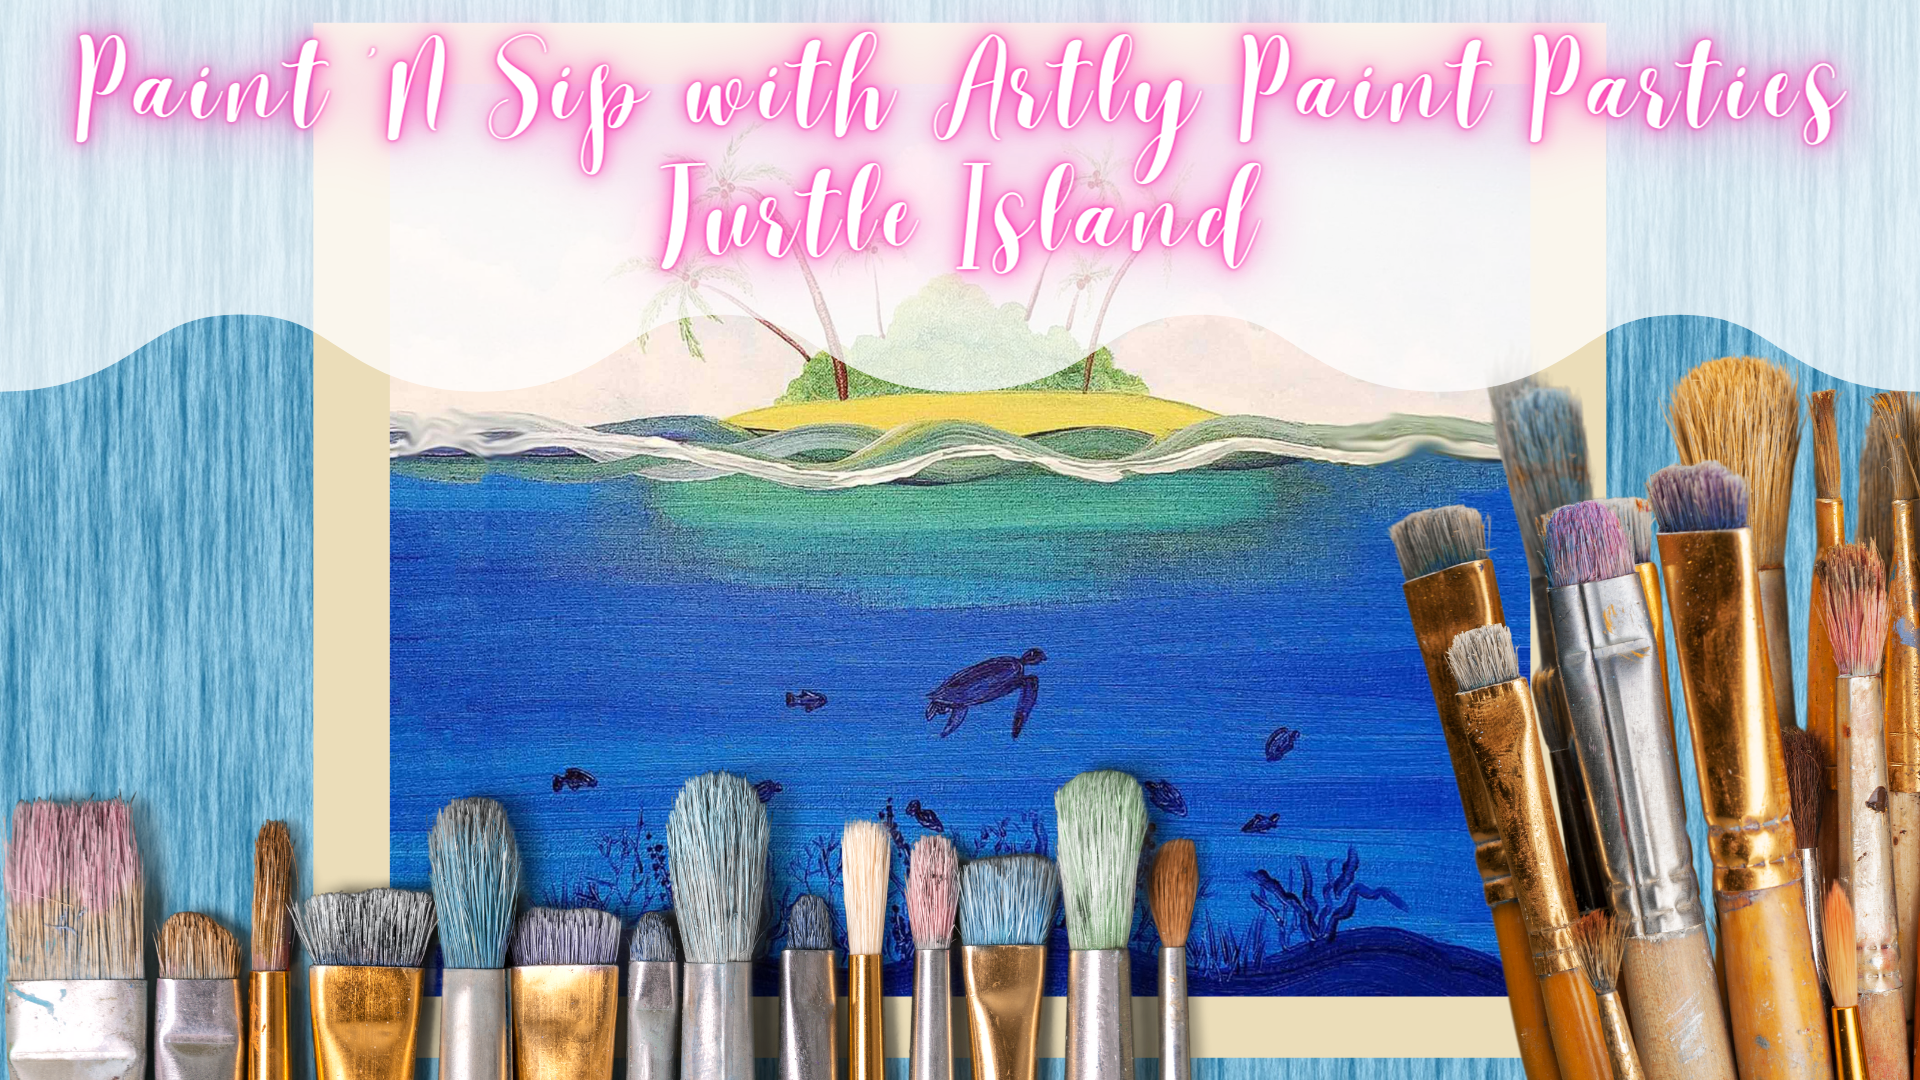 Paint 'N "Sip" with Artly Paint Parties, Turtle Island